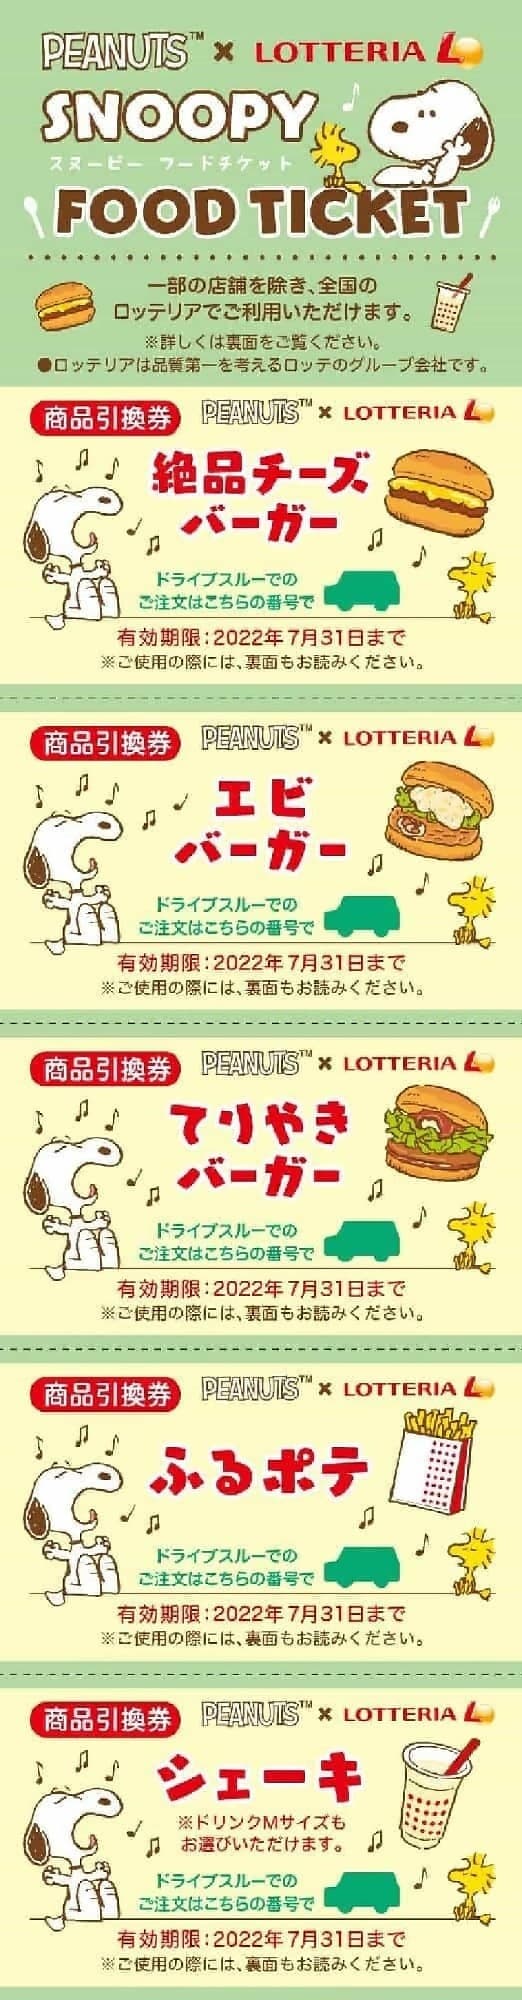 Lotteria "Snoopy and Colorful Lunch ♪ Set Snoopy Food Ticket"